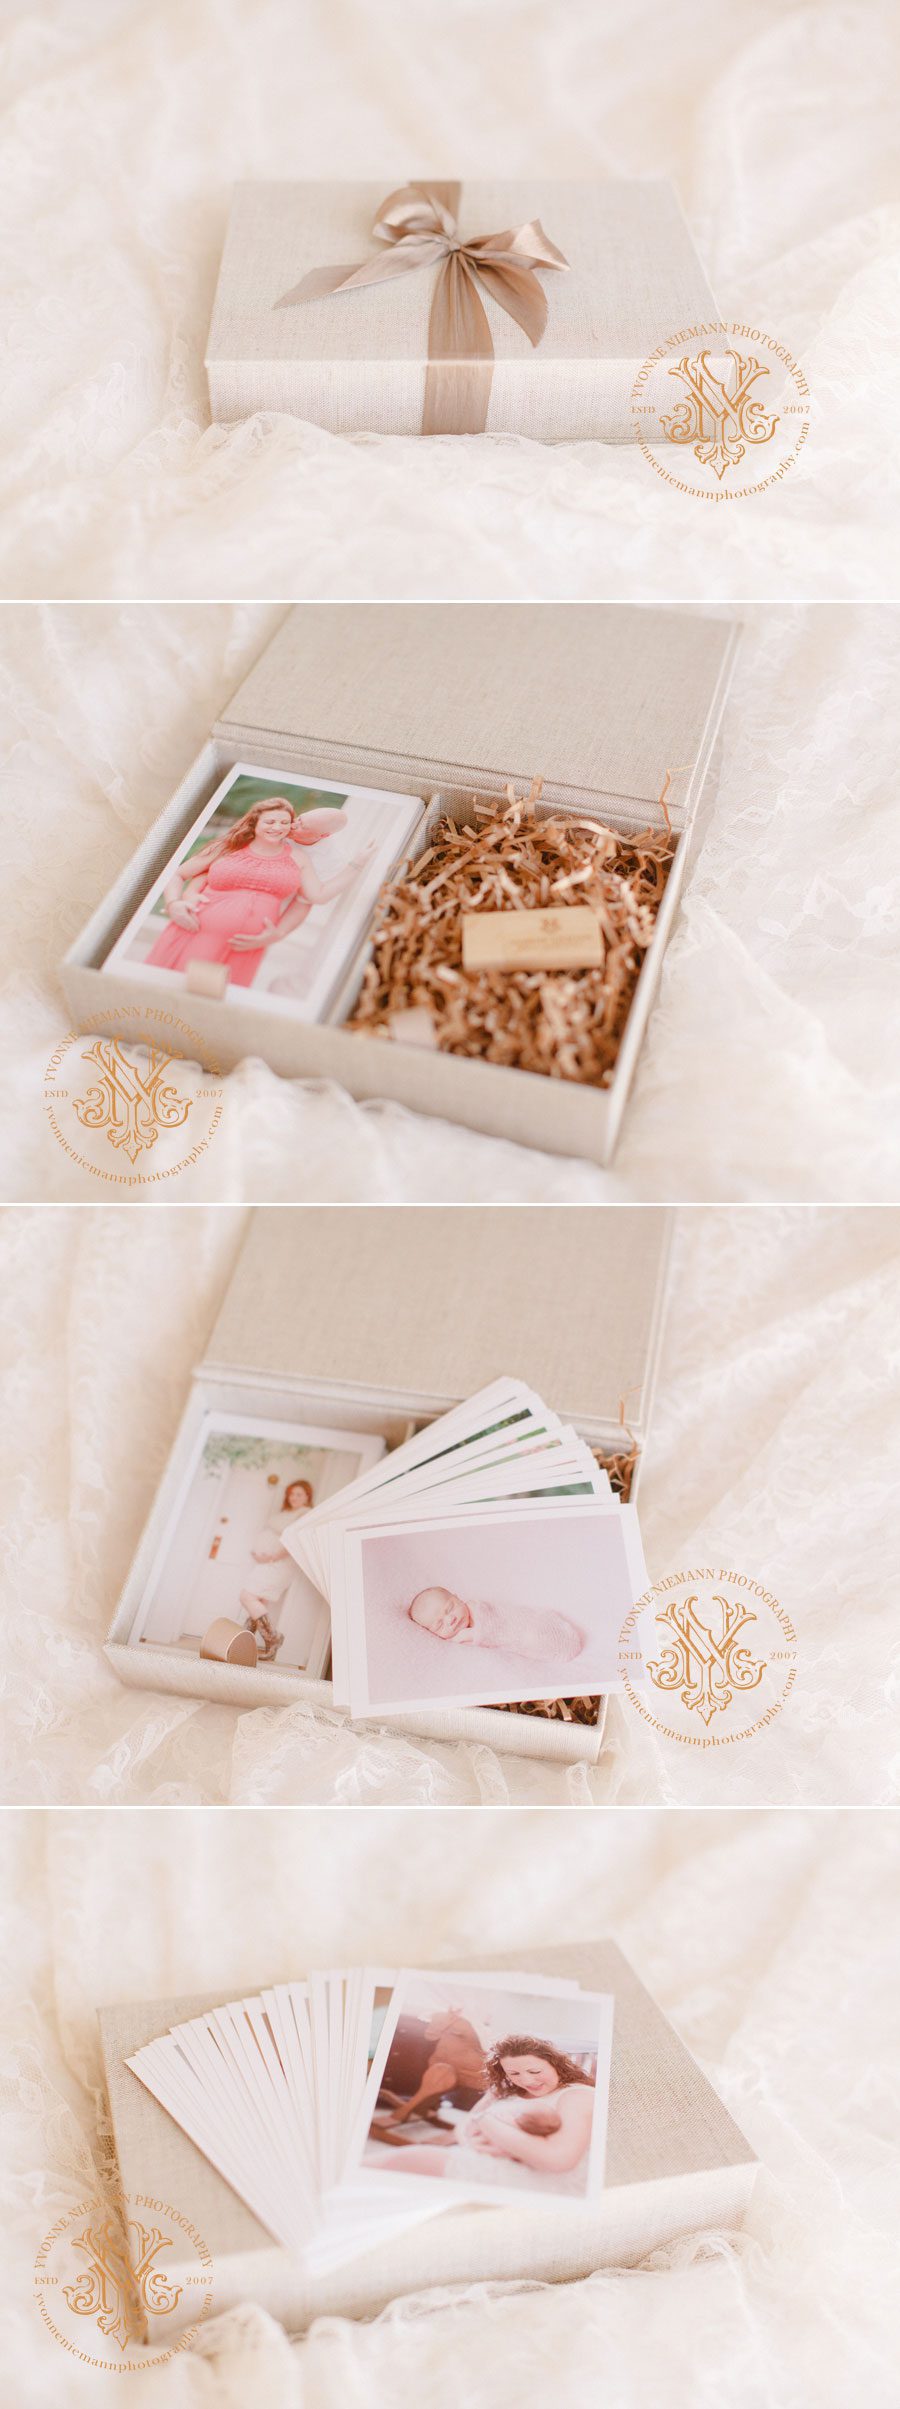 Tangible professional photos in an heirloom box offered by best Athens, GA photographer.